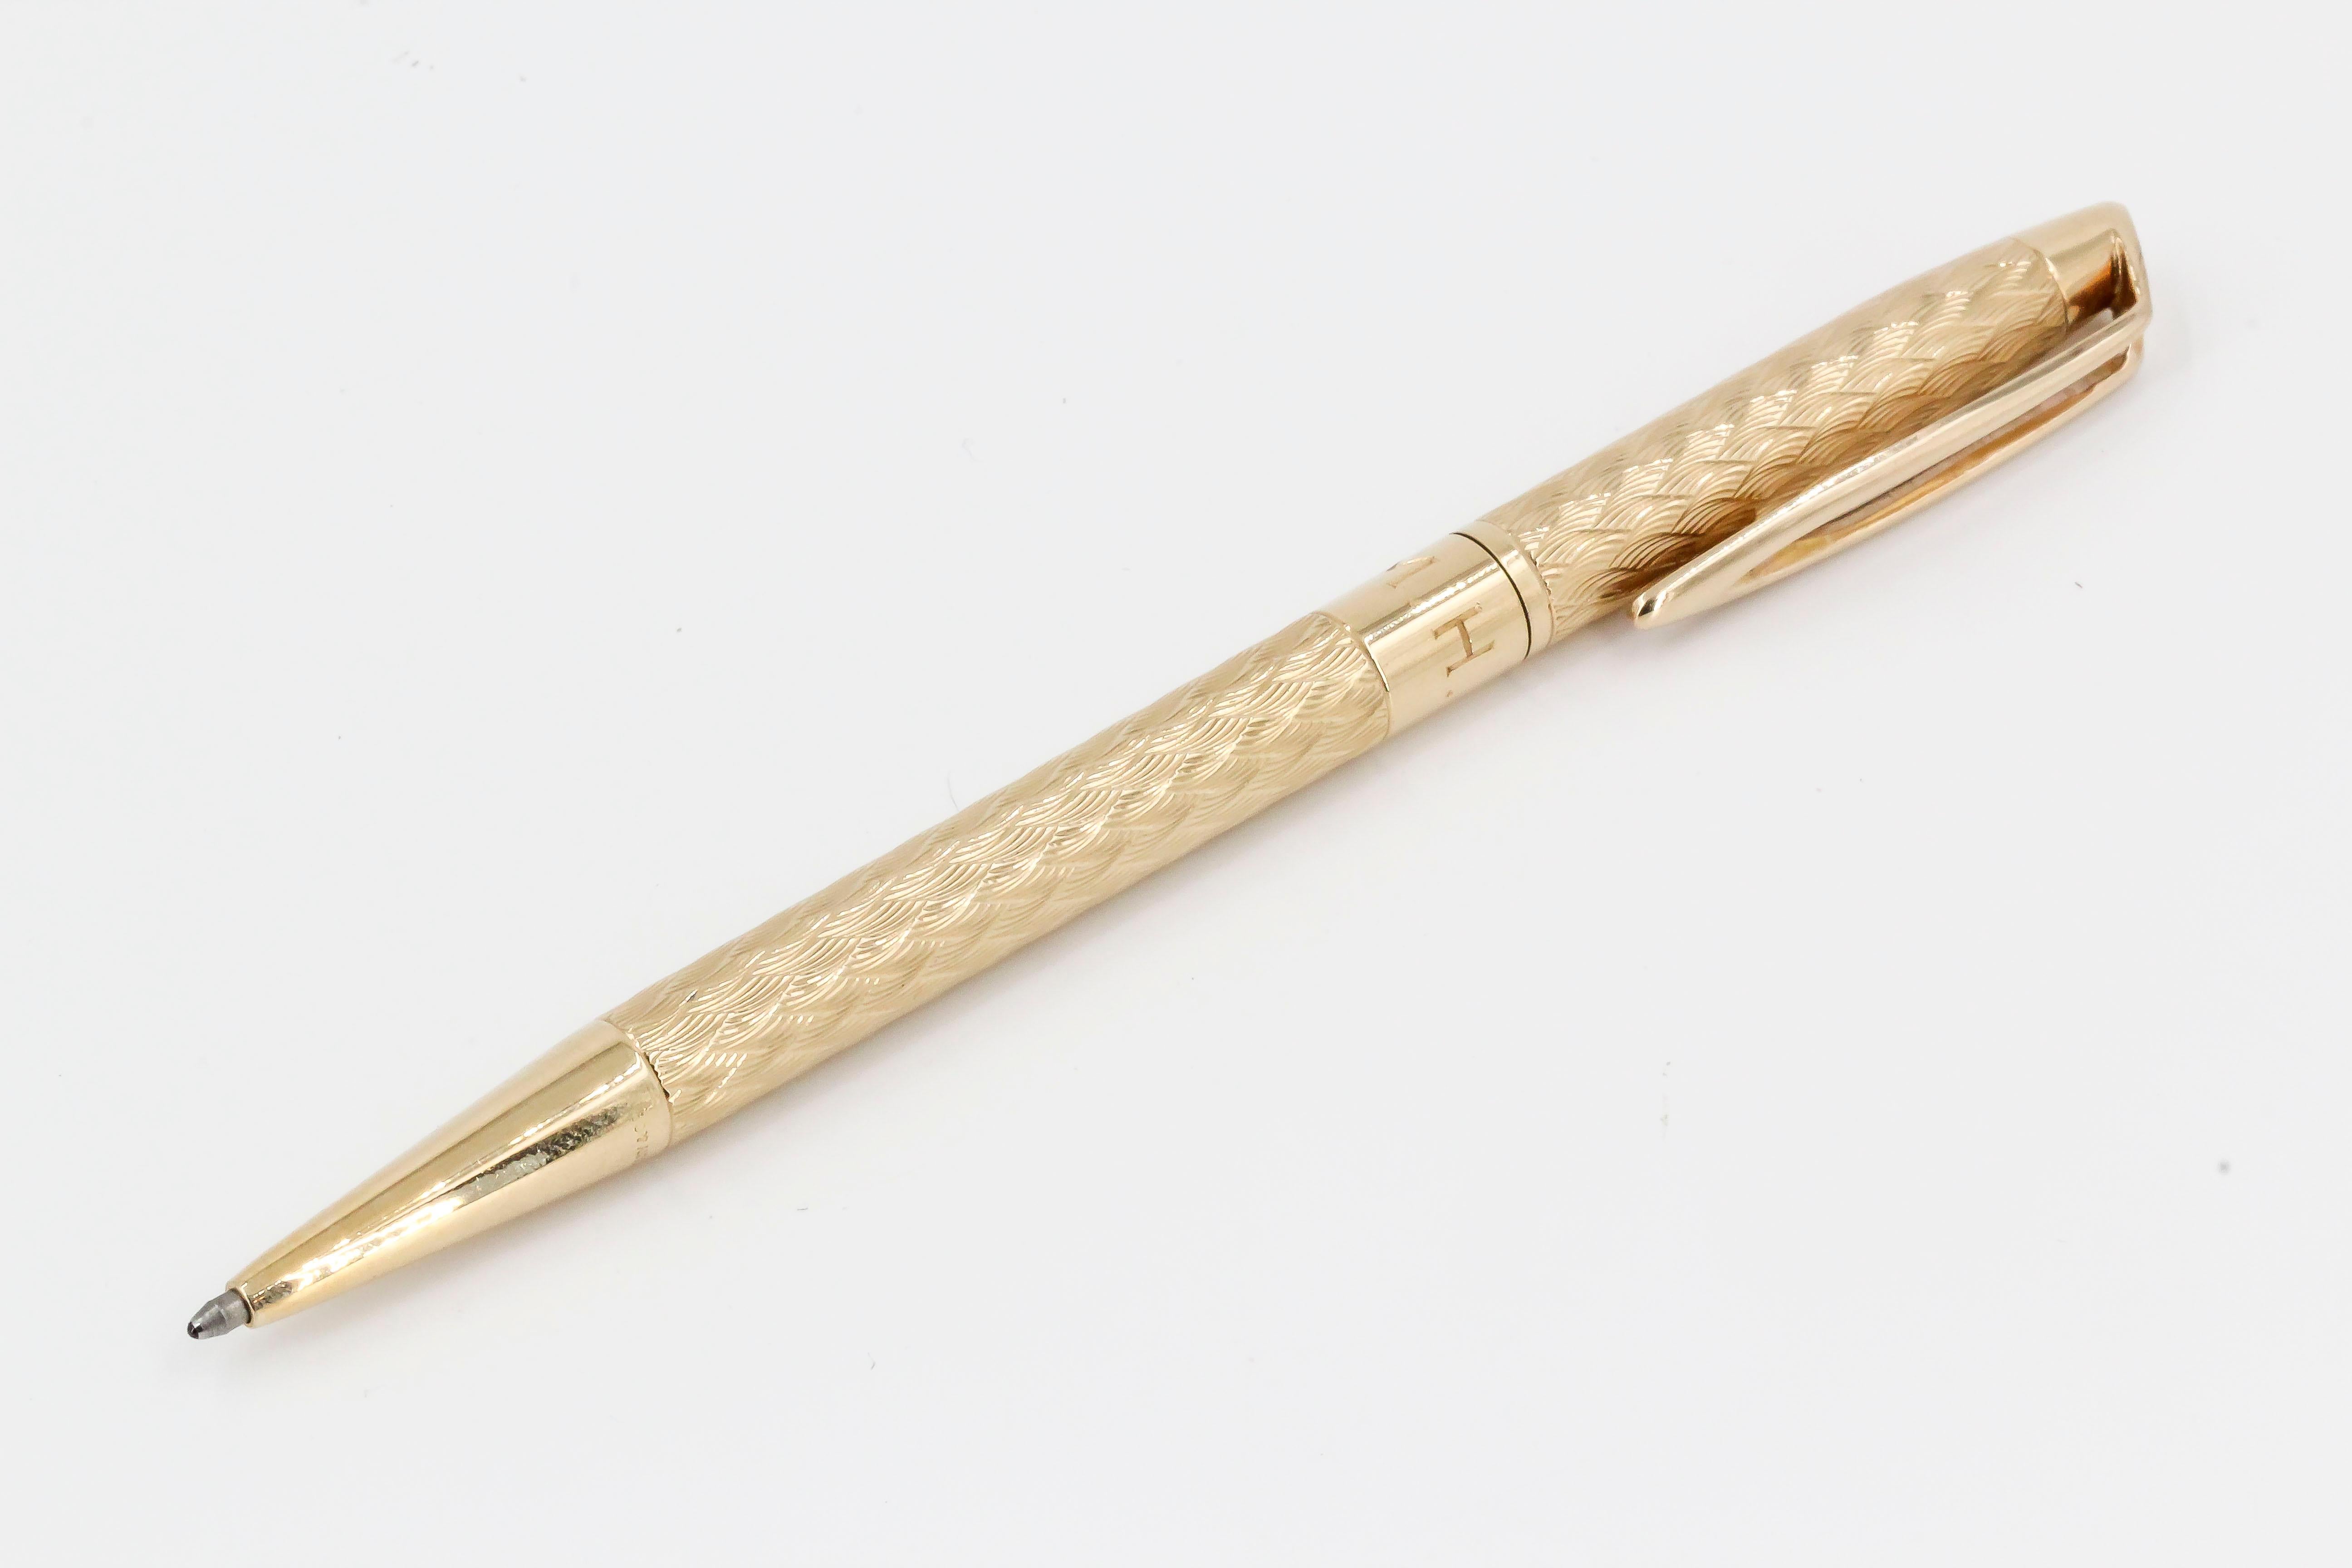 Elegant 14k yellow gold mid-century engine turned ballpoint pen by Tiffany & Co., circa 1940s. Features initials 